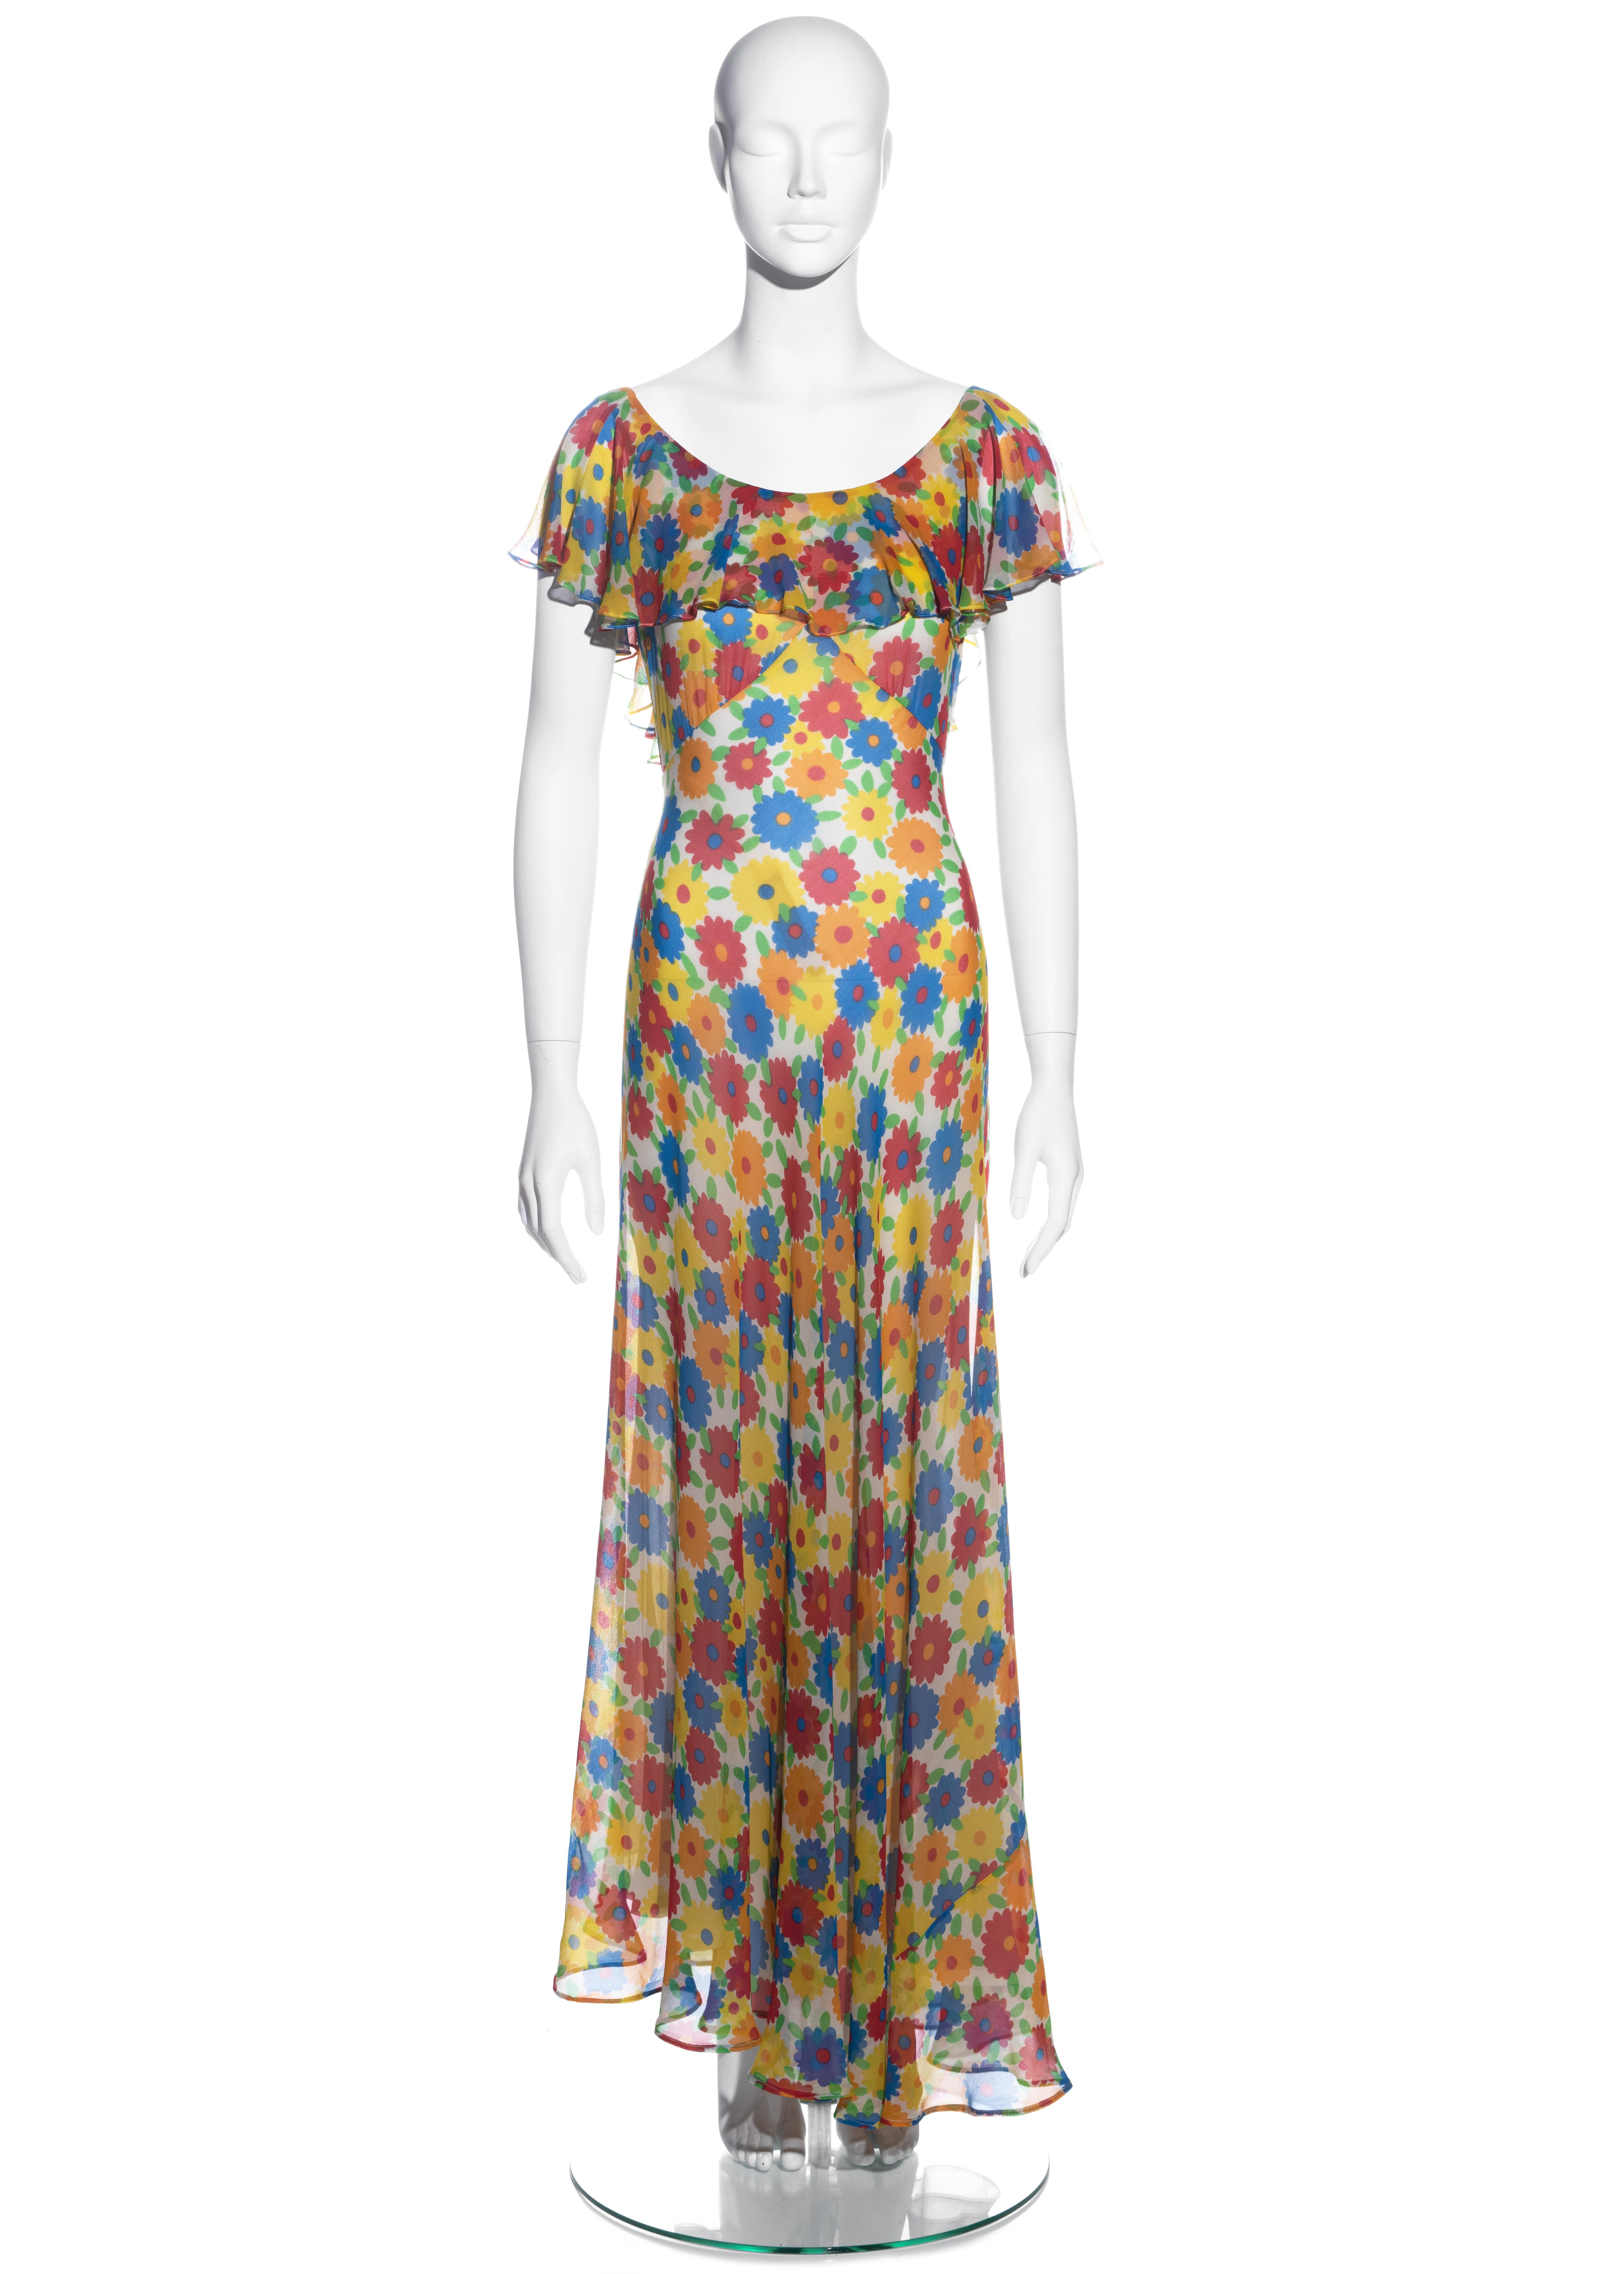 ▪ Yves Saint Laurent multicoloured maxi dress
▪ 100% Silk
▪ Red, blue, yellow, orange and green floral print with ivory base 
▪ Low back 
▪ Waist ties on waist 
▪ Zip fastening on side seam 
▪ FR 38 - UK 10 - US 6 
▪ Spring-Summer 1972